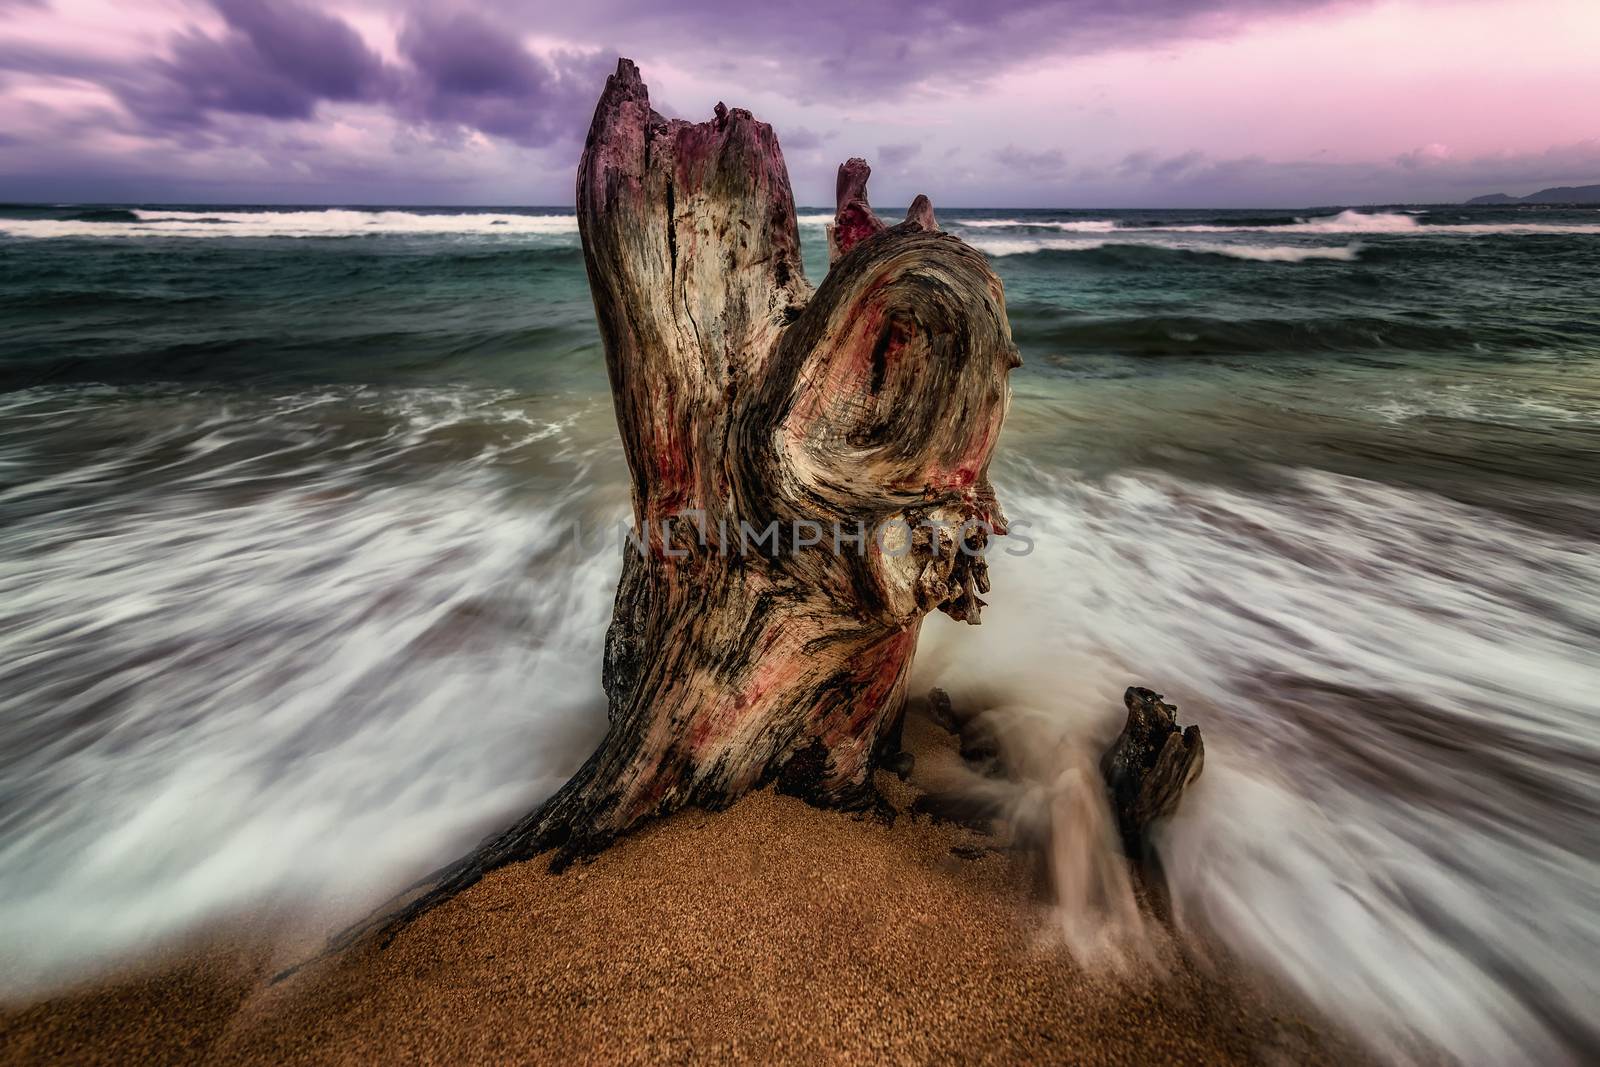 The remains of a tree stump are pounded by the Pacific Ocean at sunset. Kauai, Hawaii.